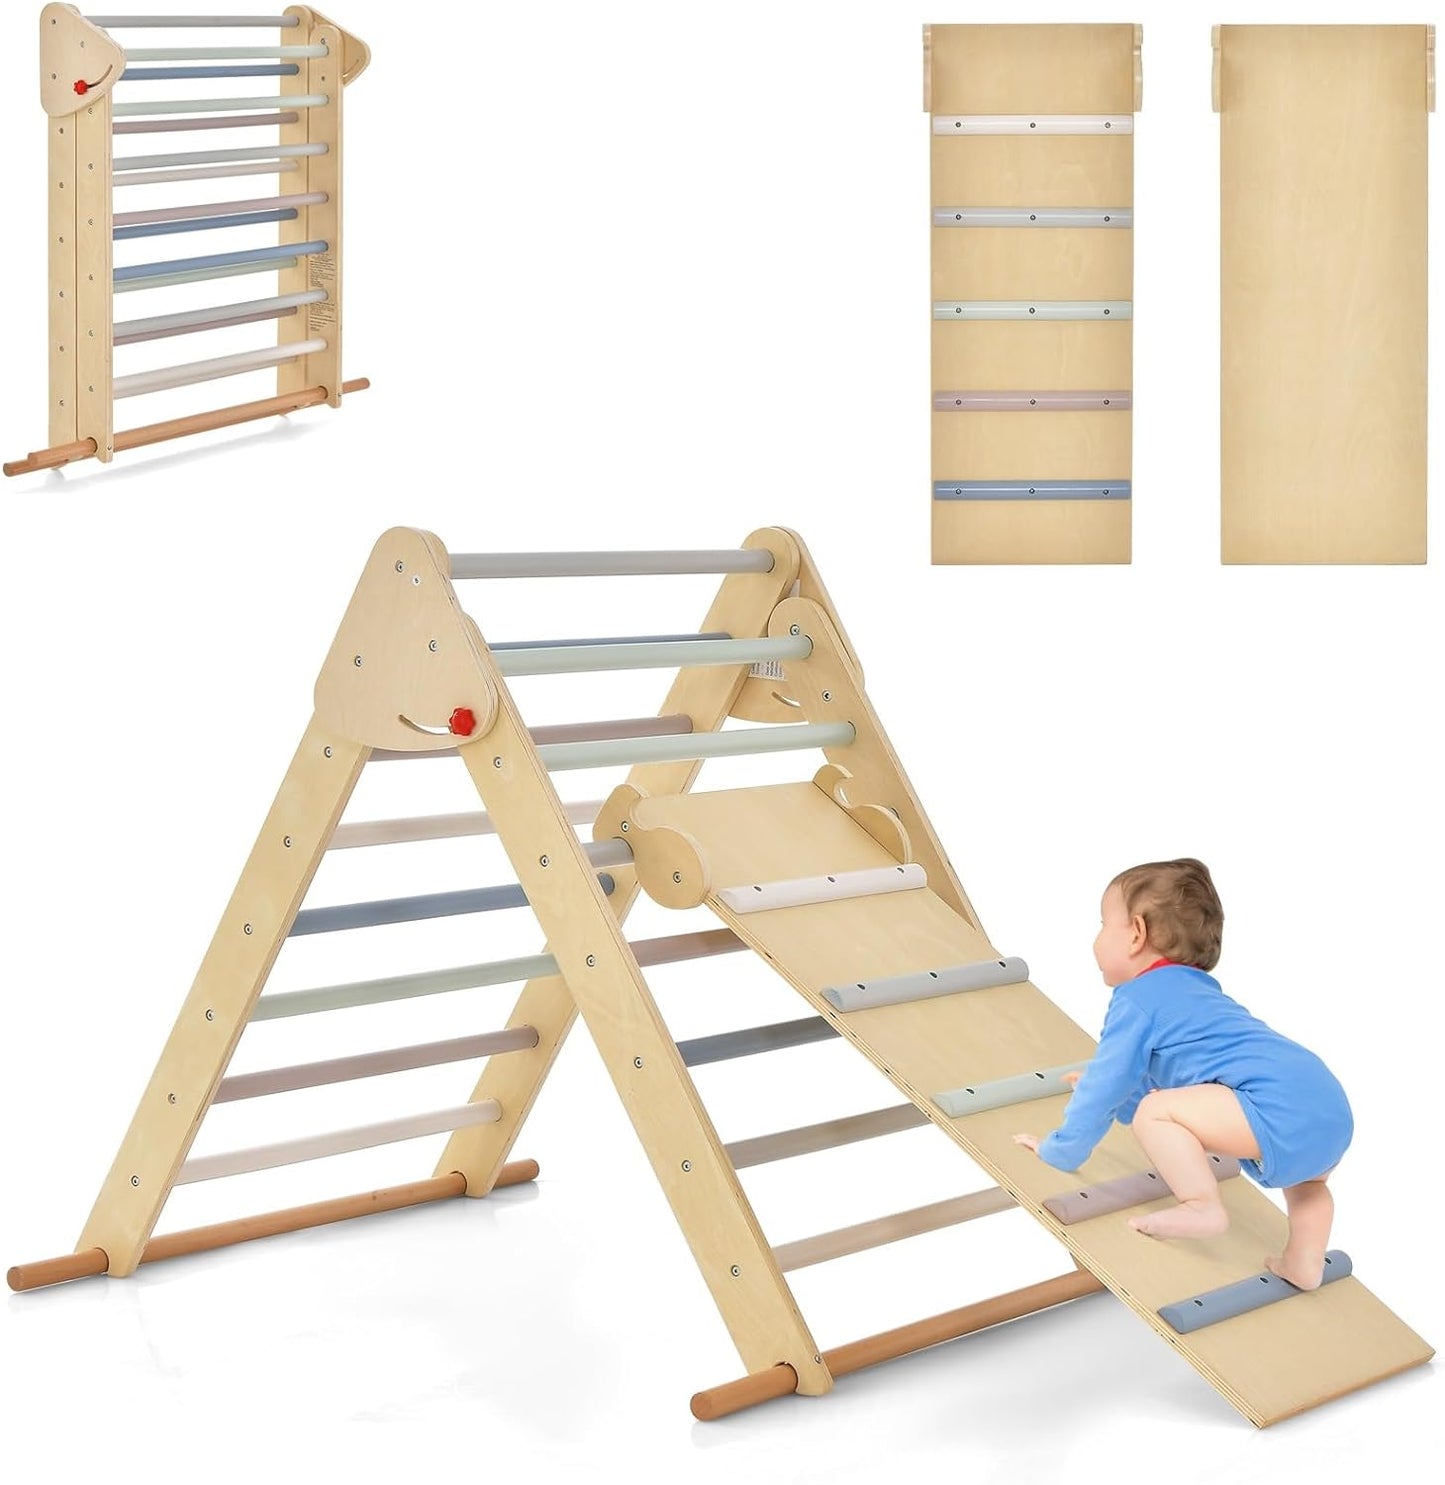 OLAKIDS Climbing Toys for Toddlers, 3 in 1 Foldable Kids Wood Montessori Pikler Climber Ladder with Ramp, Slide for Gym Playground, Baby Indoor Climb Play Structure Activity Set